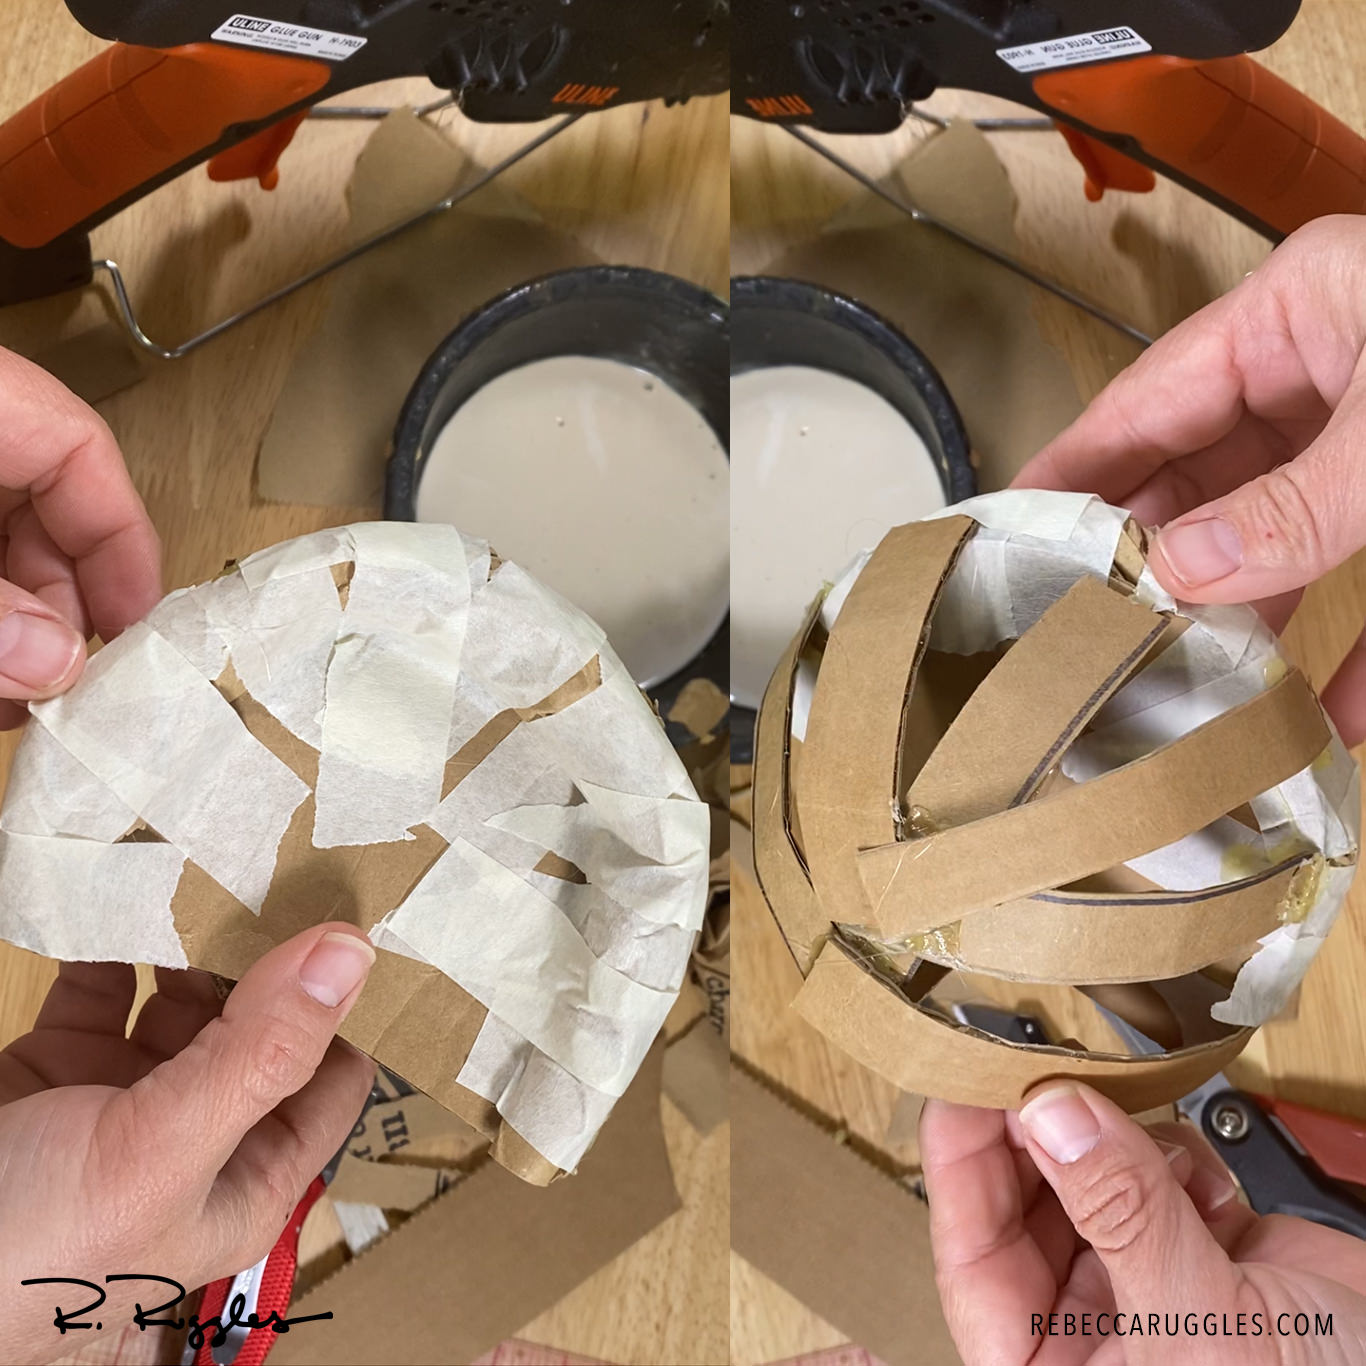 Building the shape of the panda ears with cardboard, tape, and hot glue.